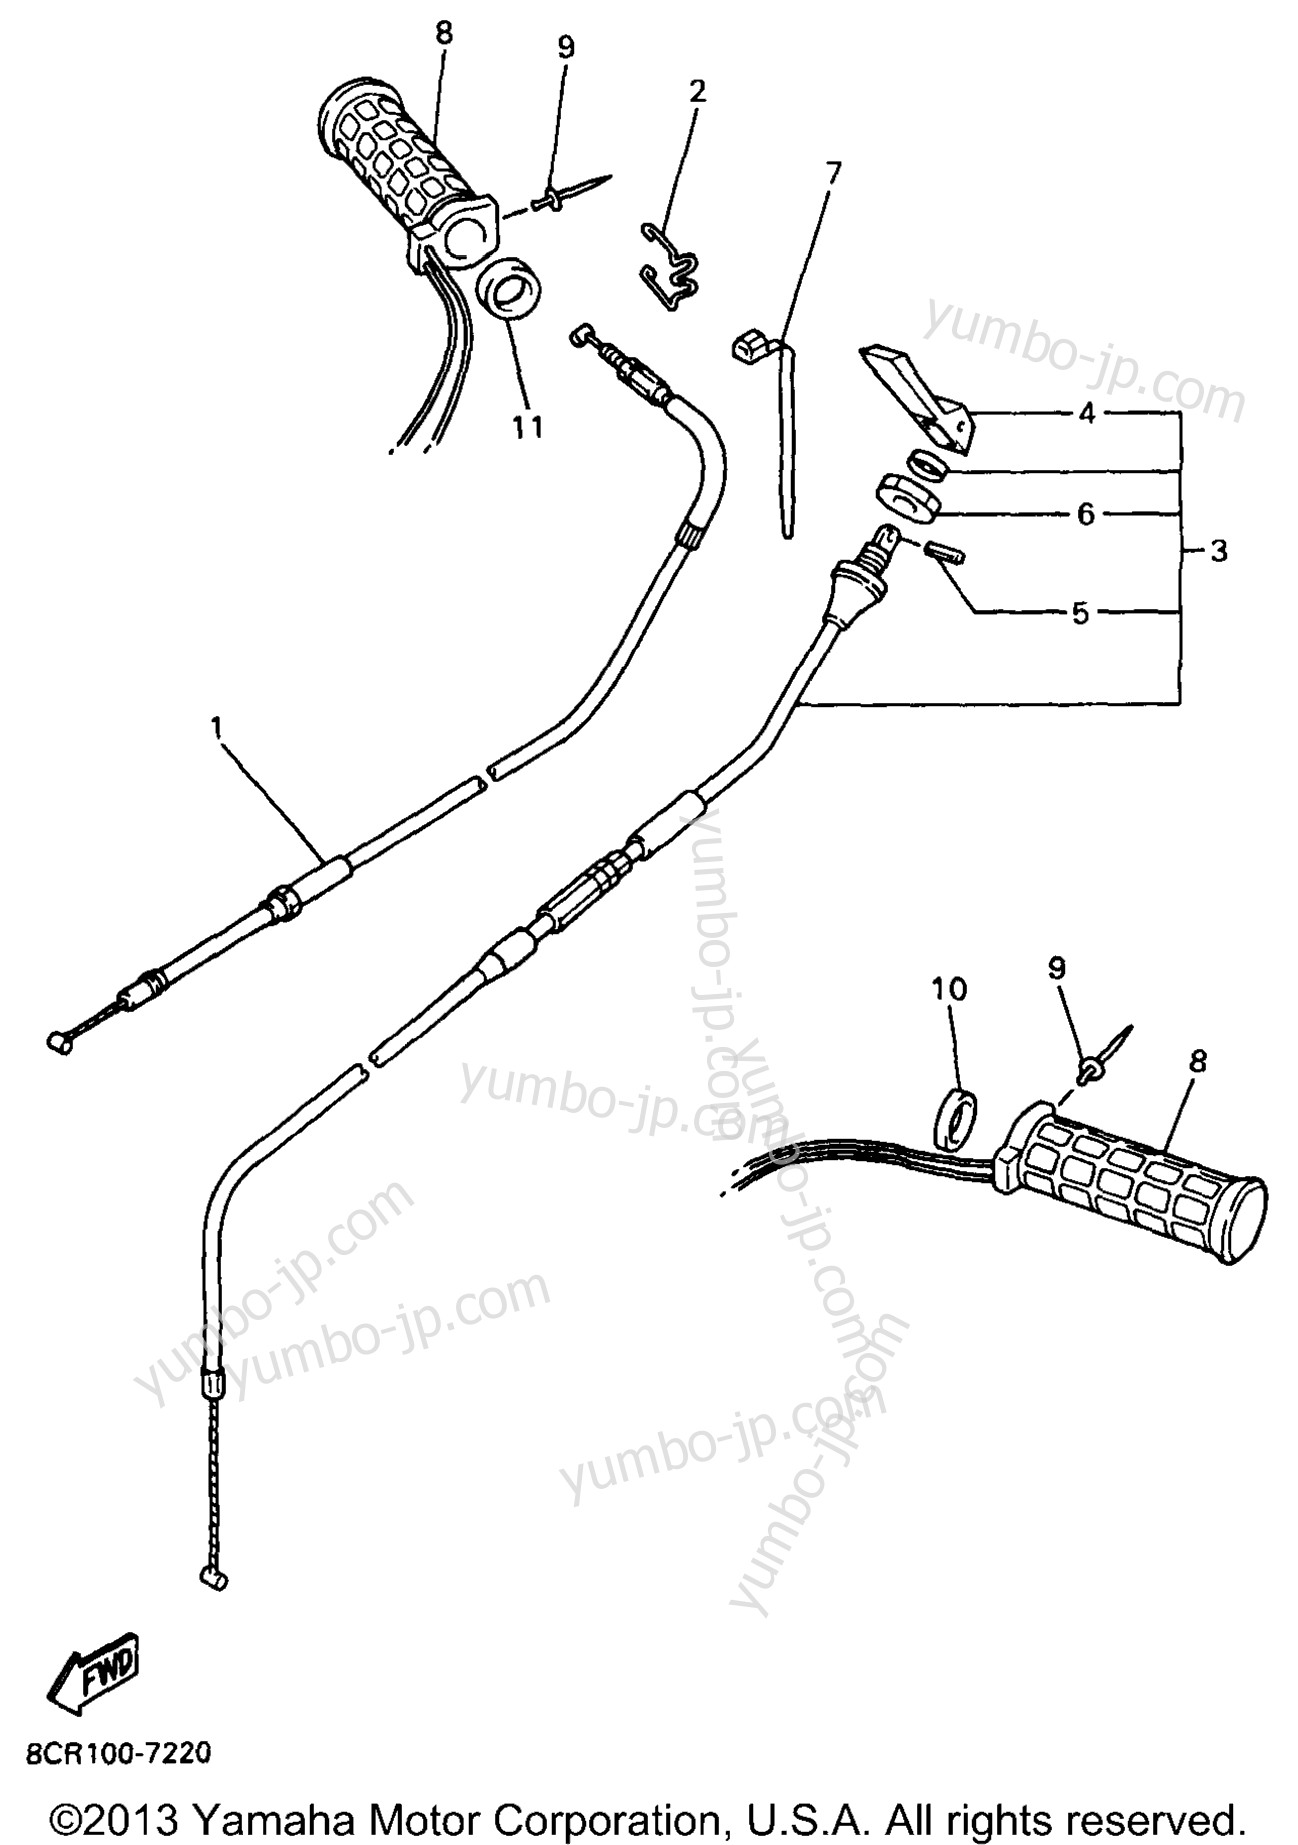 CONTROL CABLE for snowmobiles YAMAHA VMAX 500 XTR (ELEC START+REVERSE) (VX500XTRB) 1998 year